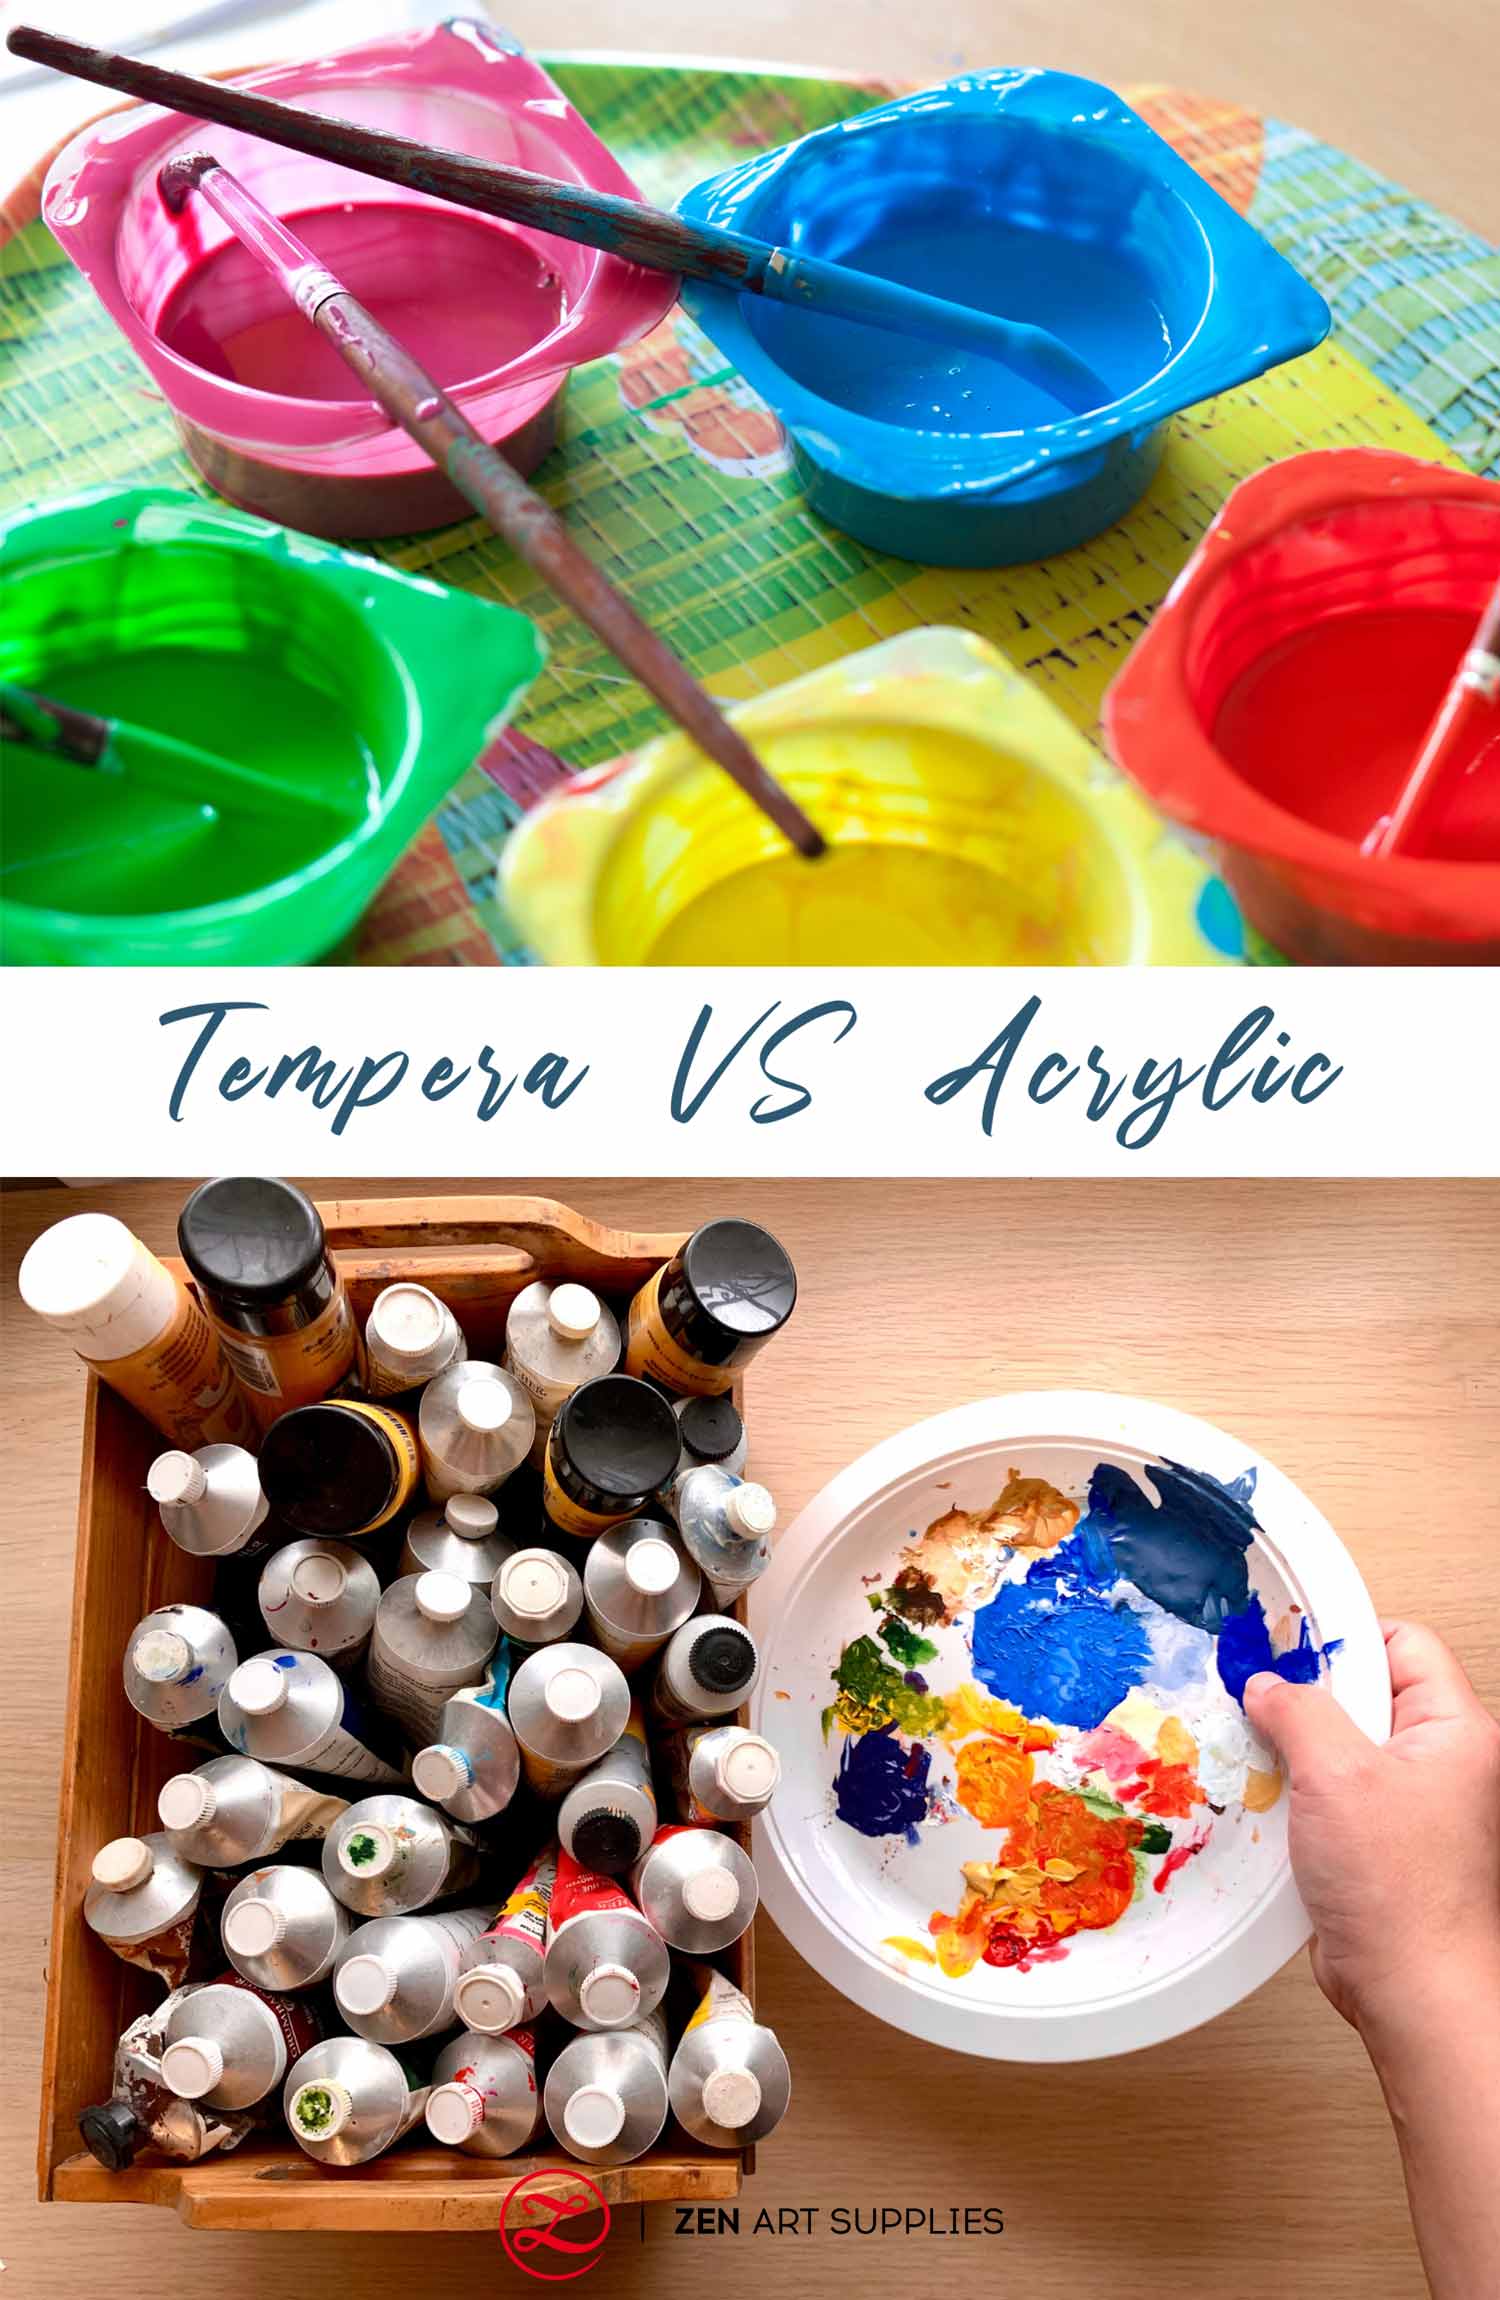 What Paint to Use and When: Comparing Craft and Acrylic Paint